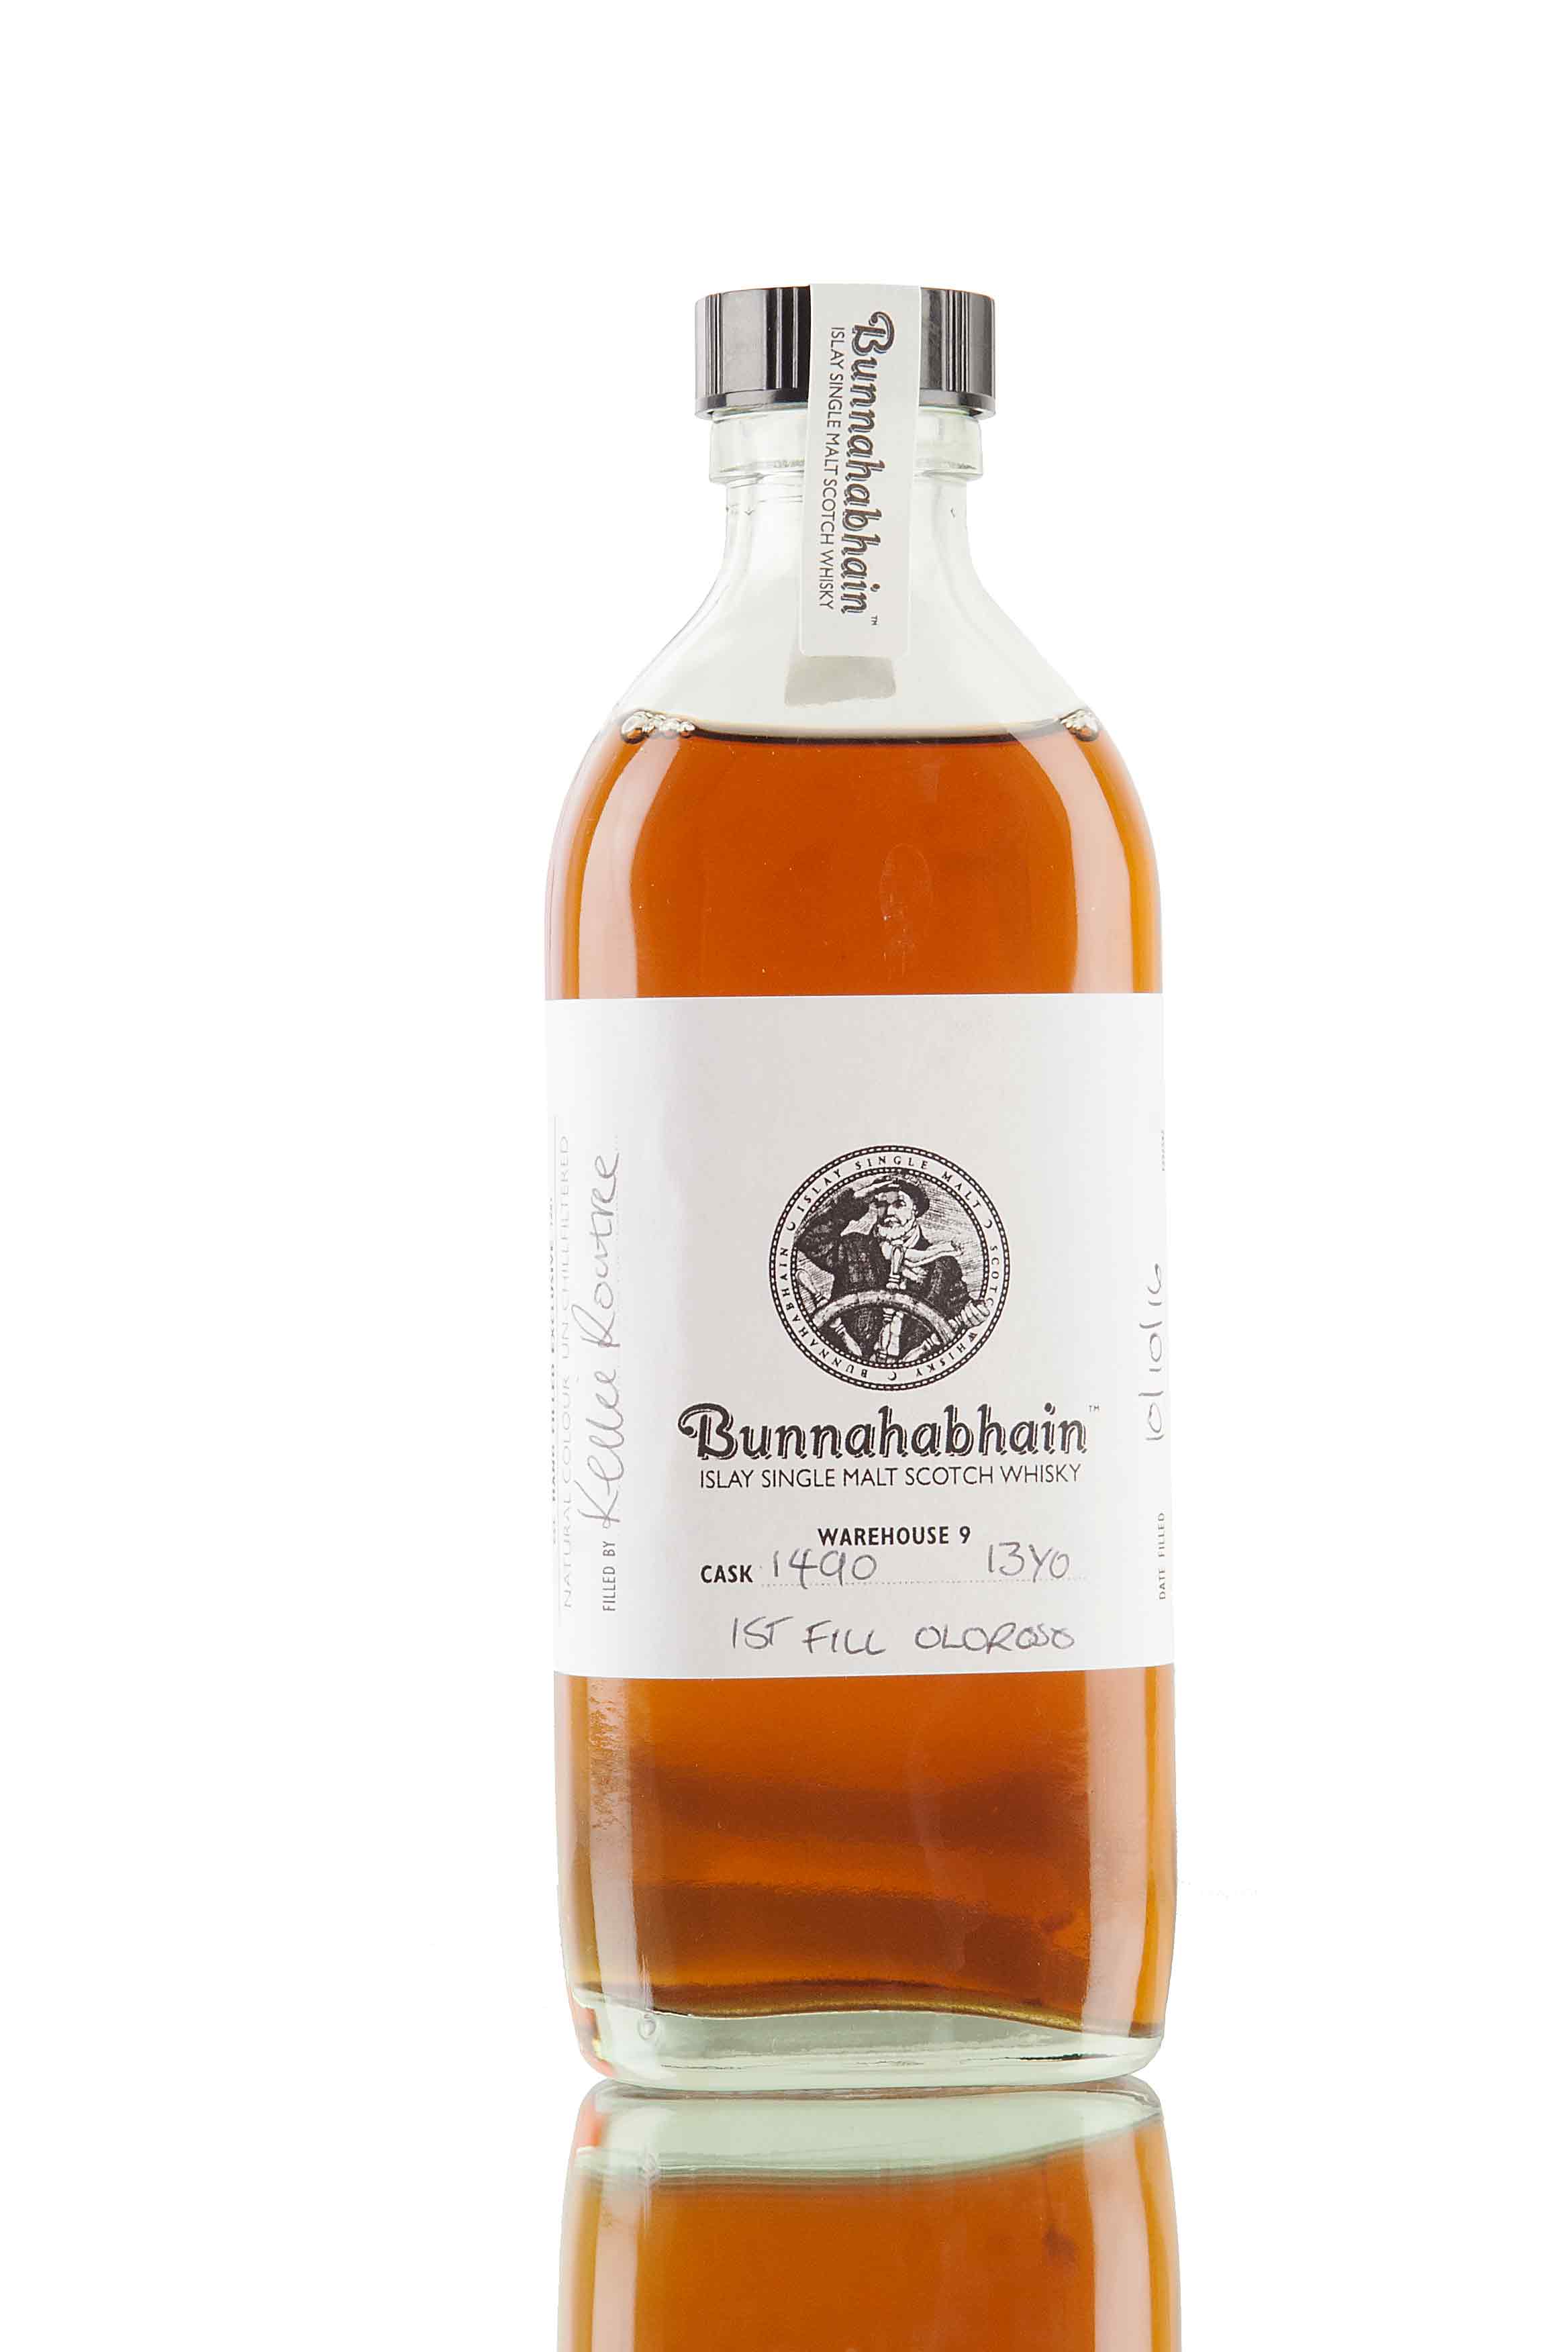 Bunnahabhain 14 Year Old - Hand Filled Exclusive Cask 1490